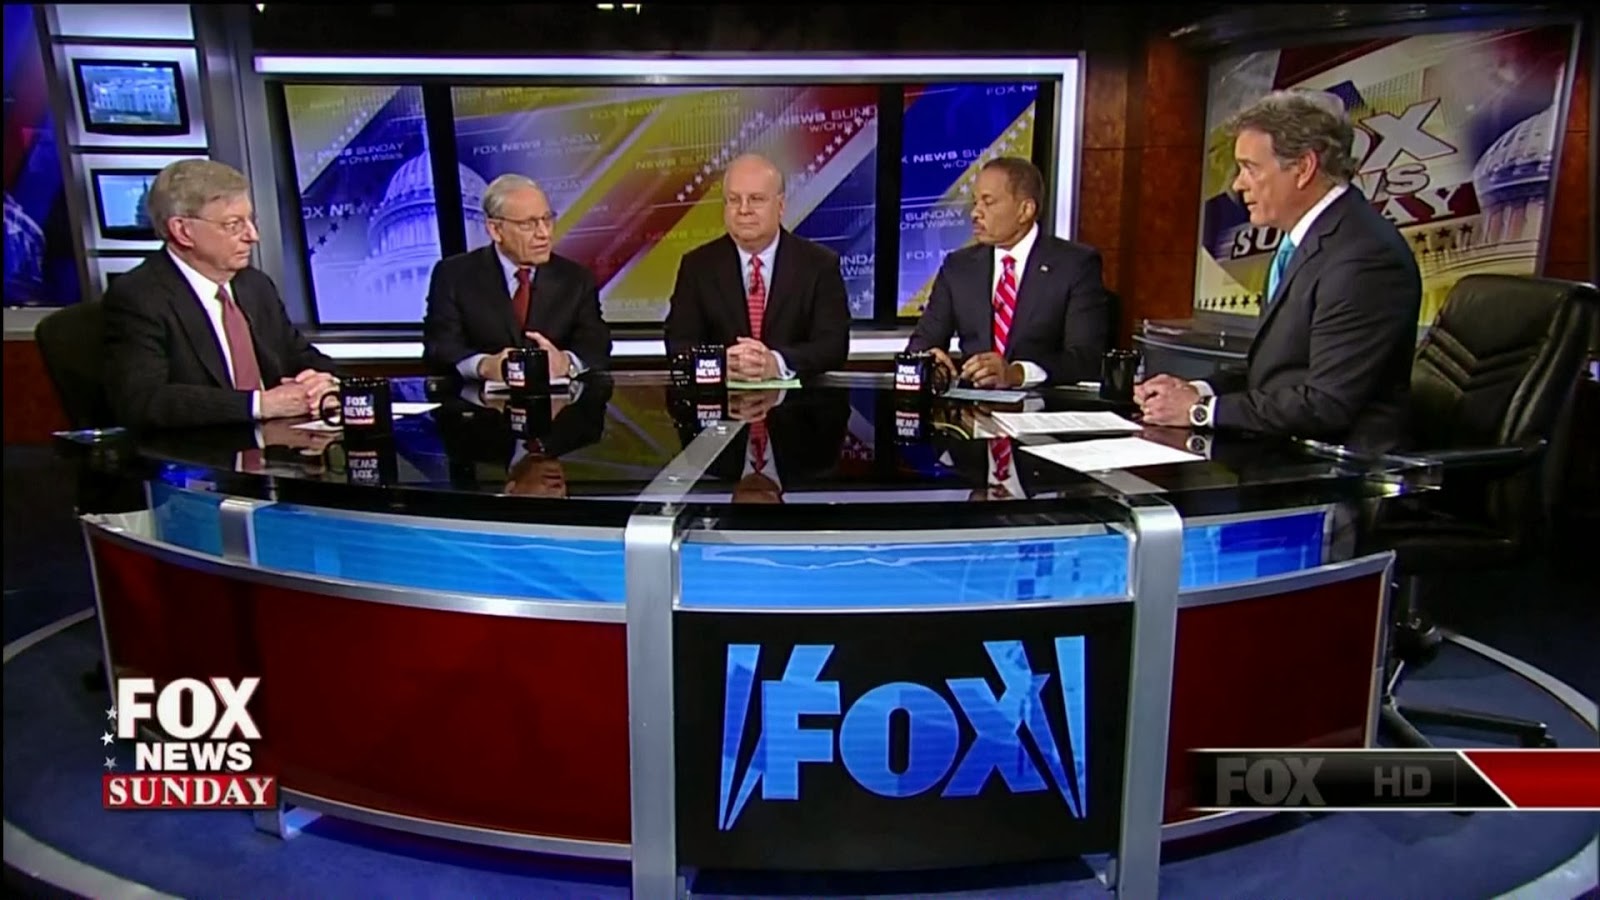 How to Watch Fox News Without Paying For Cable TV